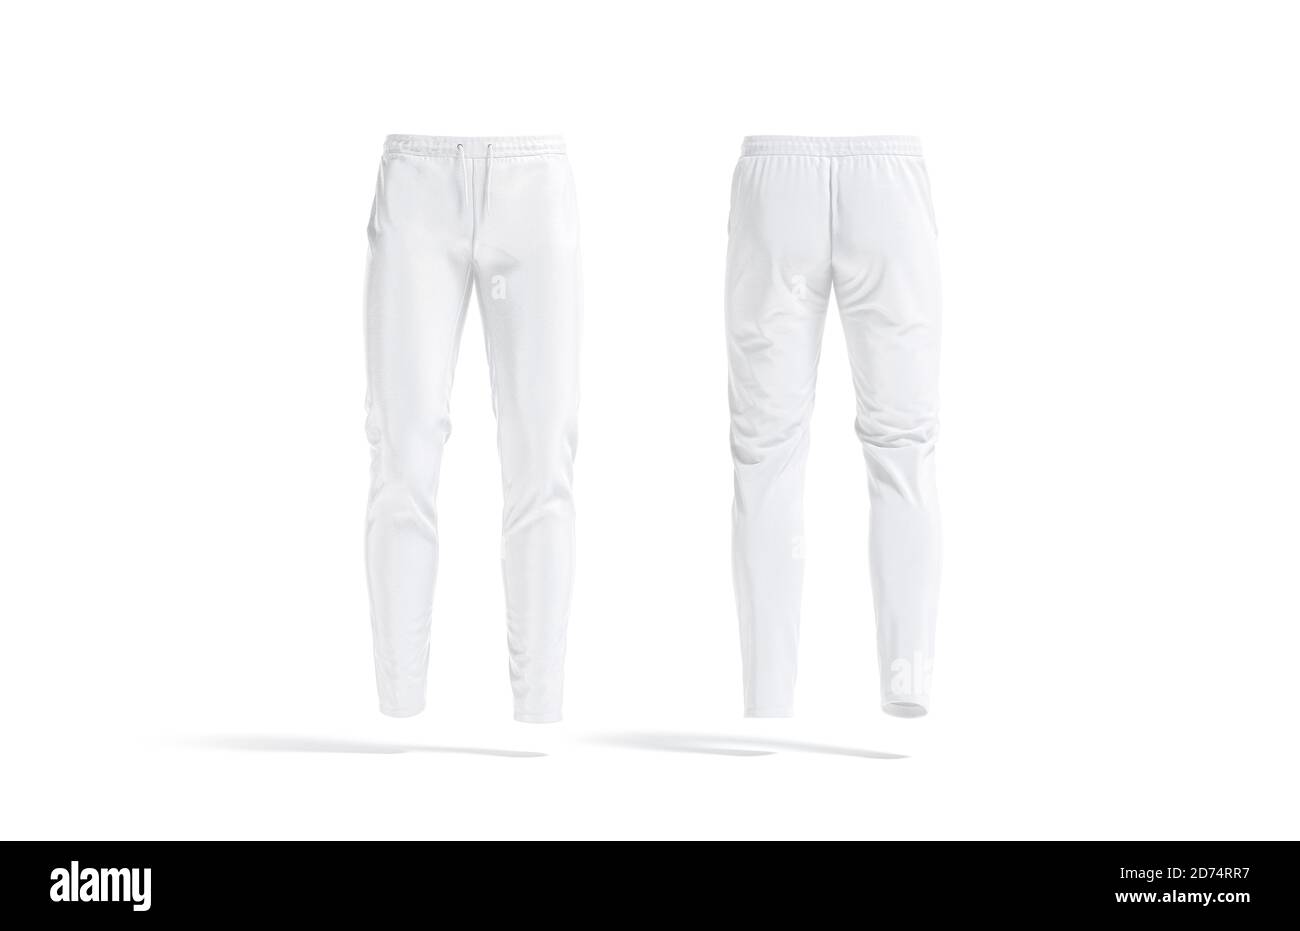 Blank white sport pants mockup, front and back view Stock Photo - Alamy